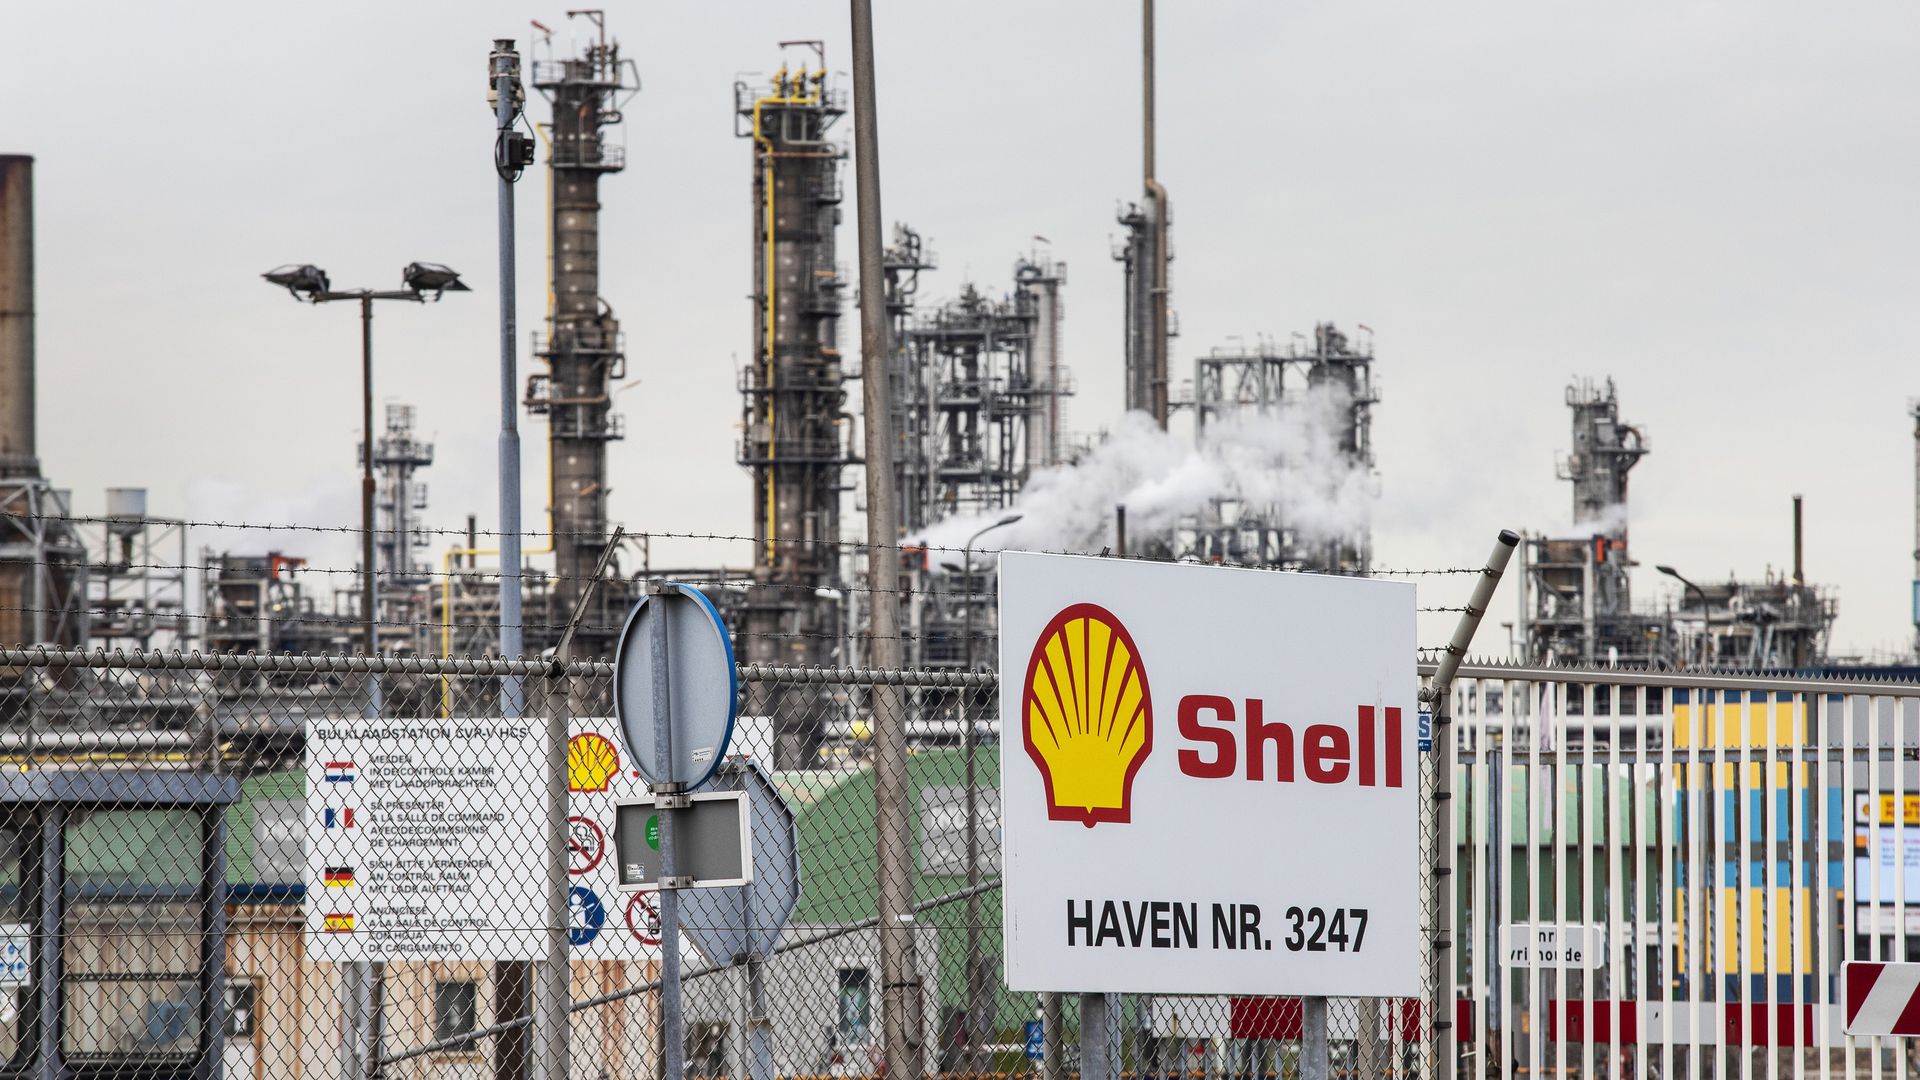 Sign saying "Shell" in front of an oil refinery.